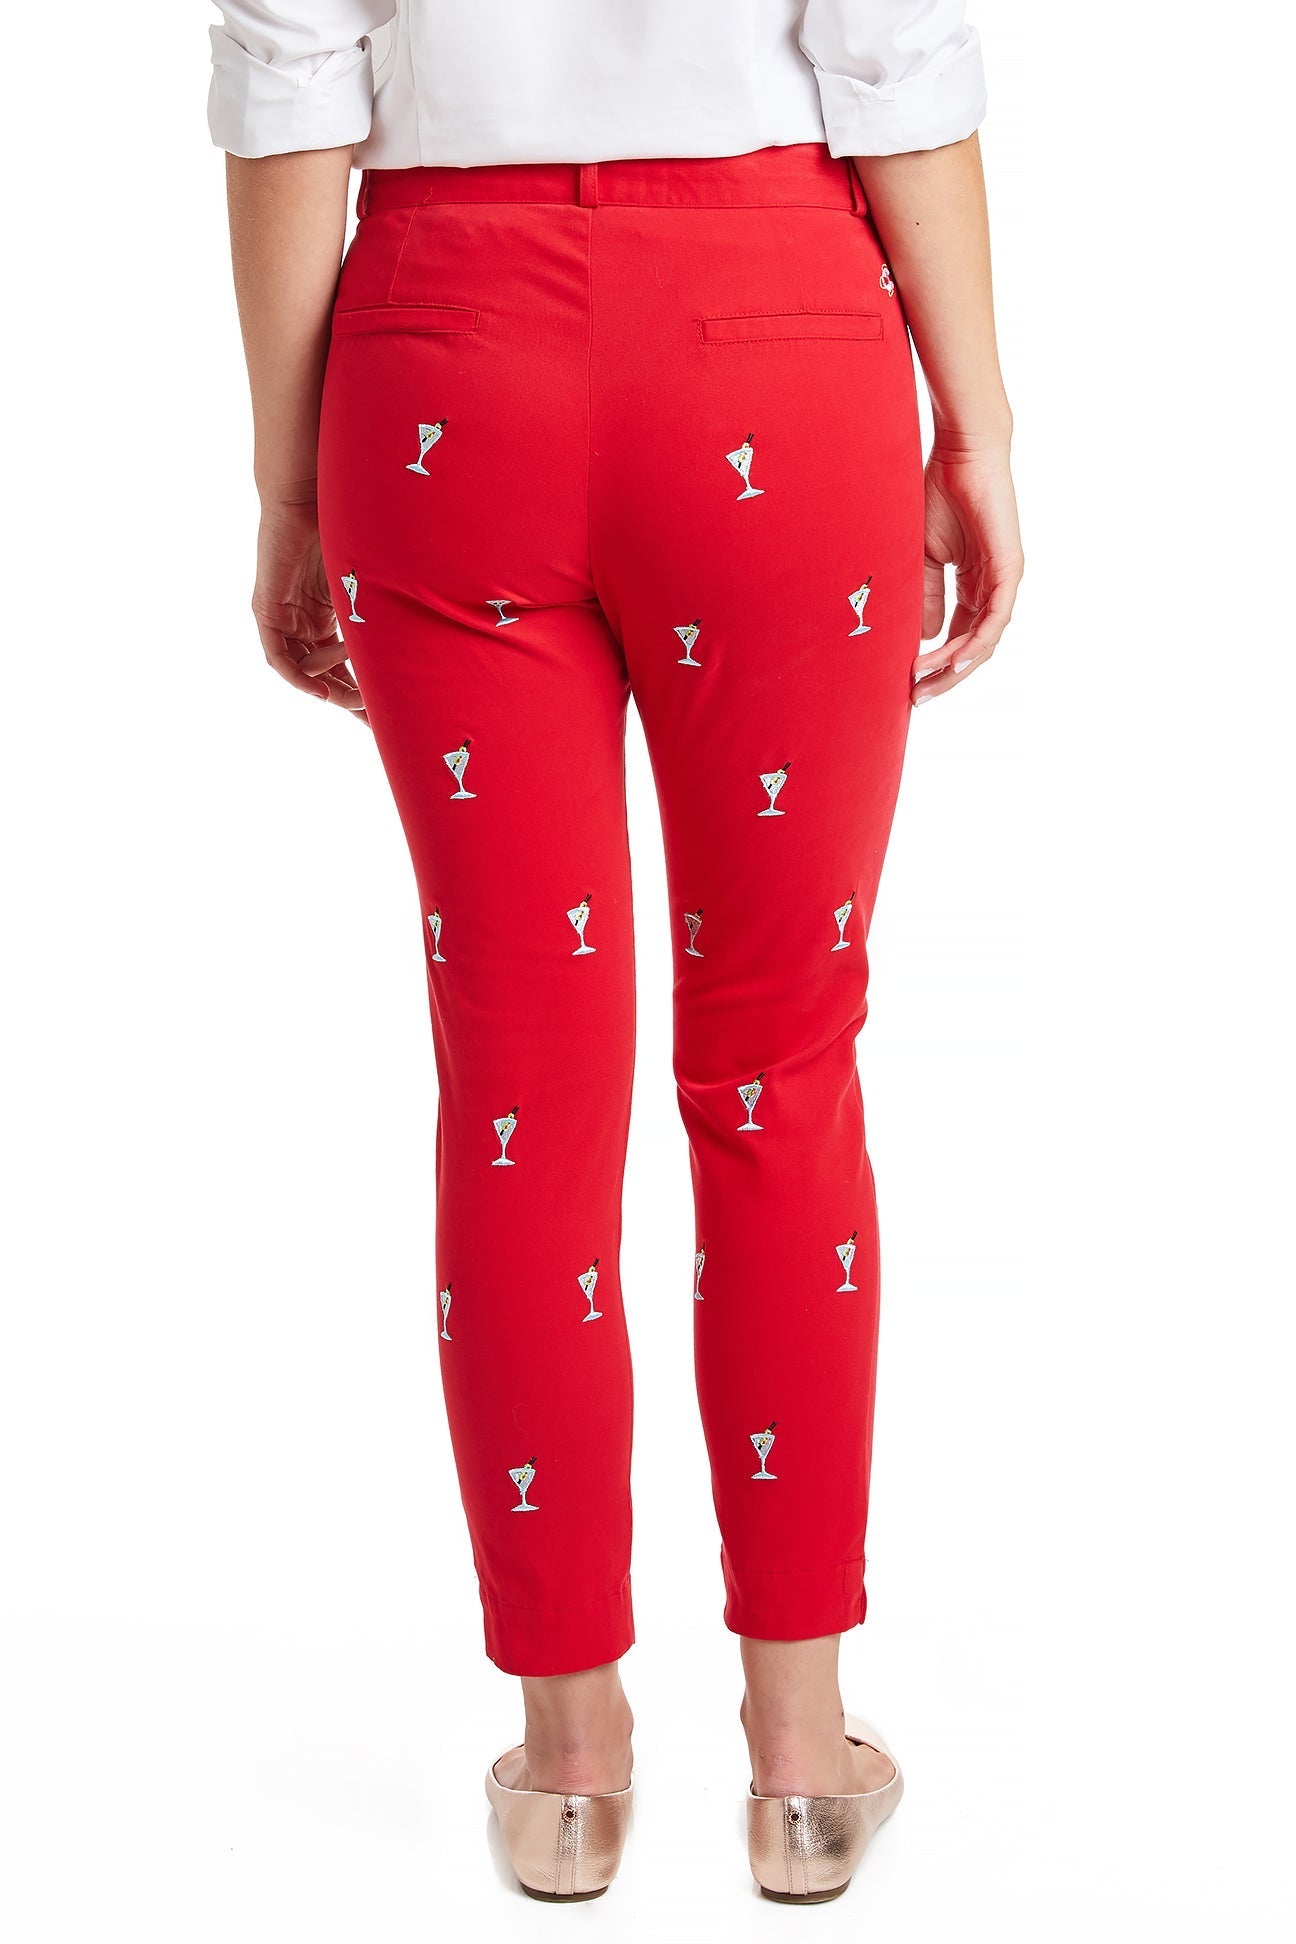 Nantucket Women's Classic Plus Size Capri Jeggings - Red – Spotted